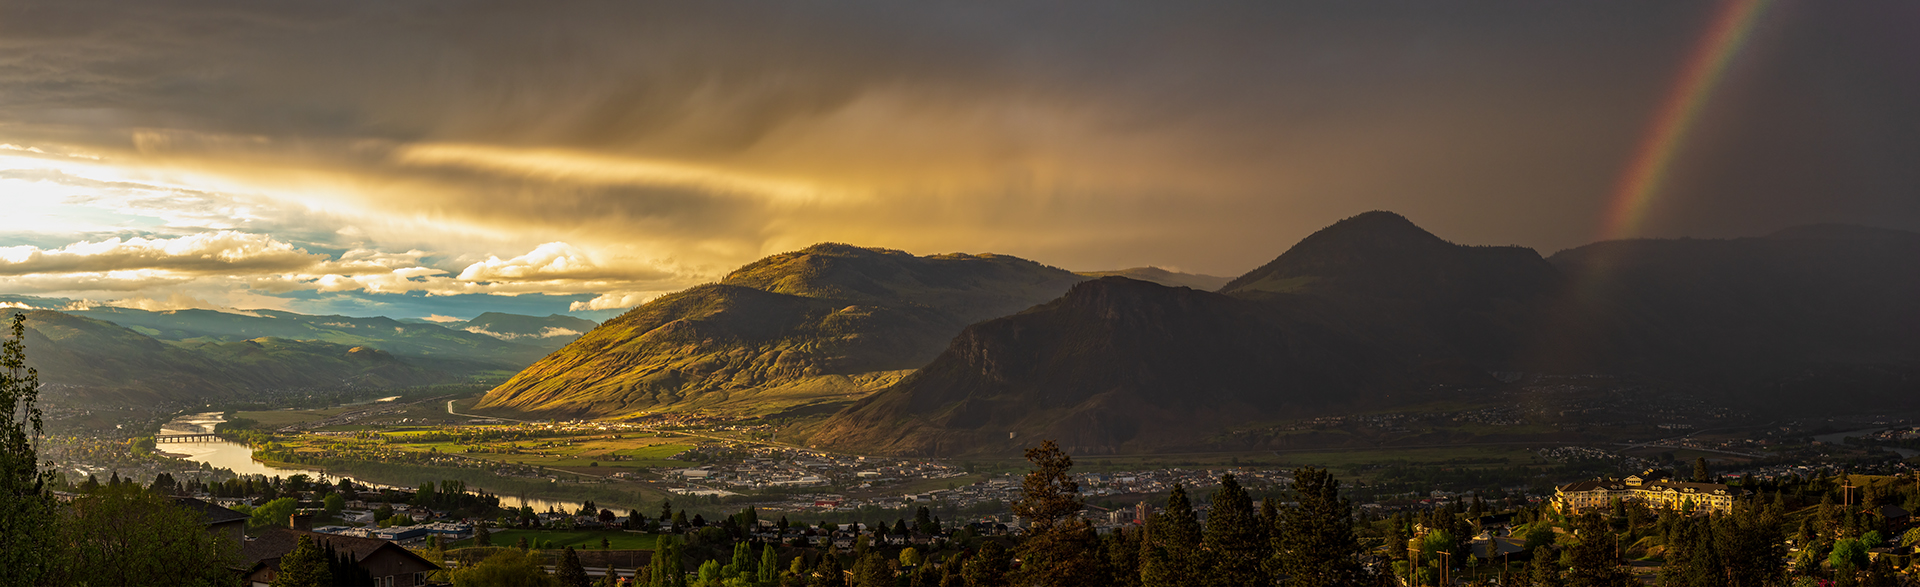 Kamloops Landscape faraway view of country landscape with mountain and rainbow